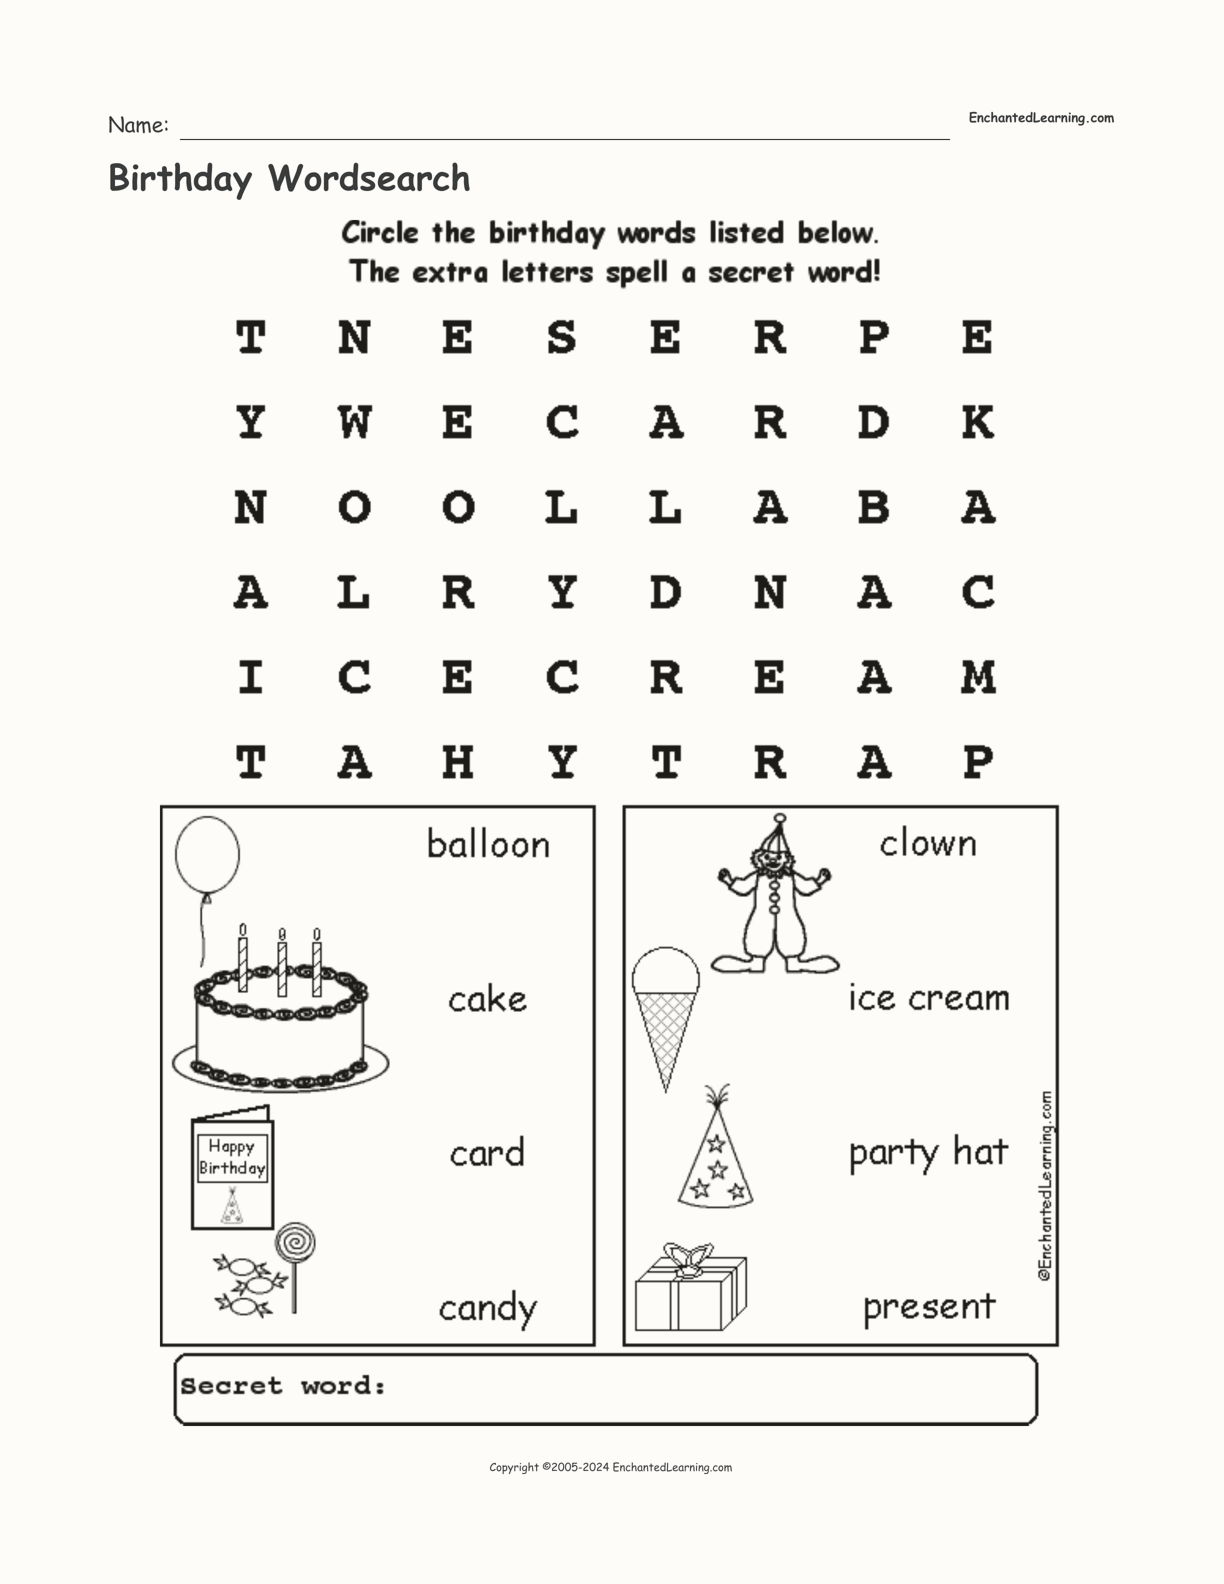 birthday-wordsearch-enchanted-learning